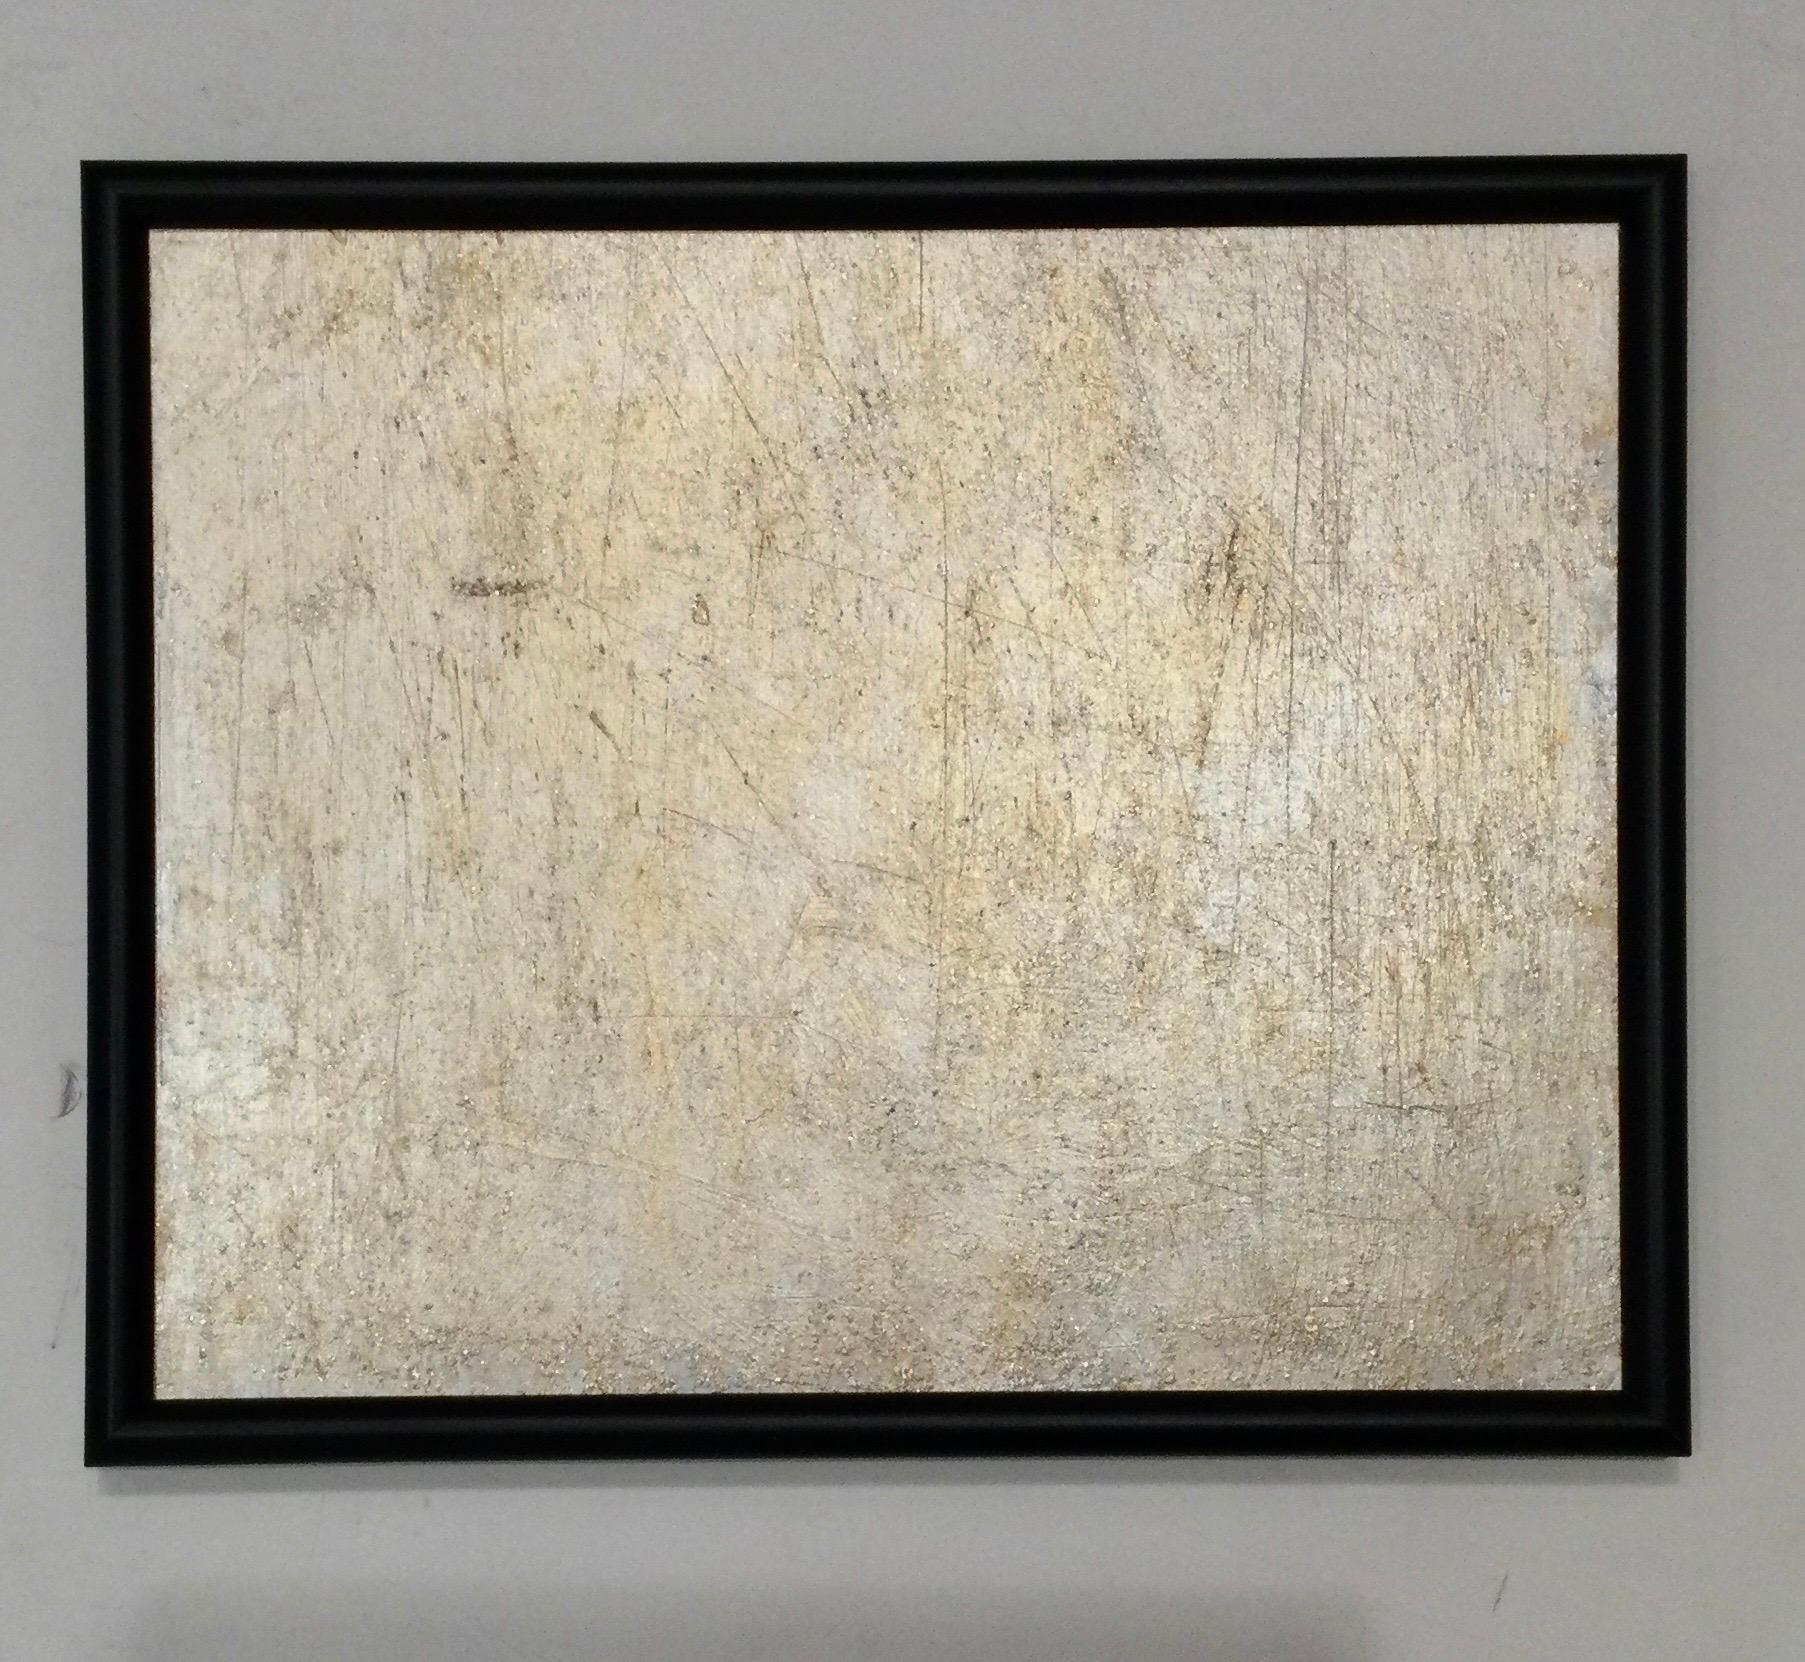 This painting consists of layers of Venetian plaster and shimmering gold acrylic. Measures: 18 by 13